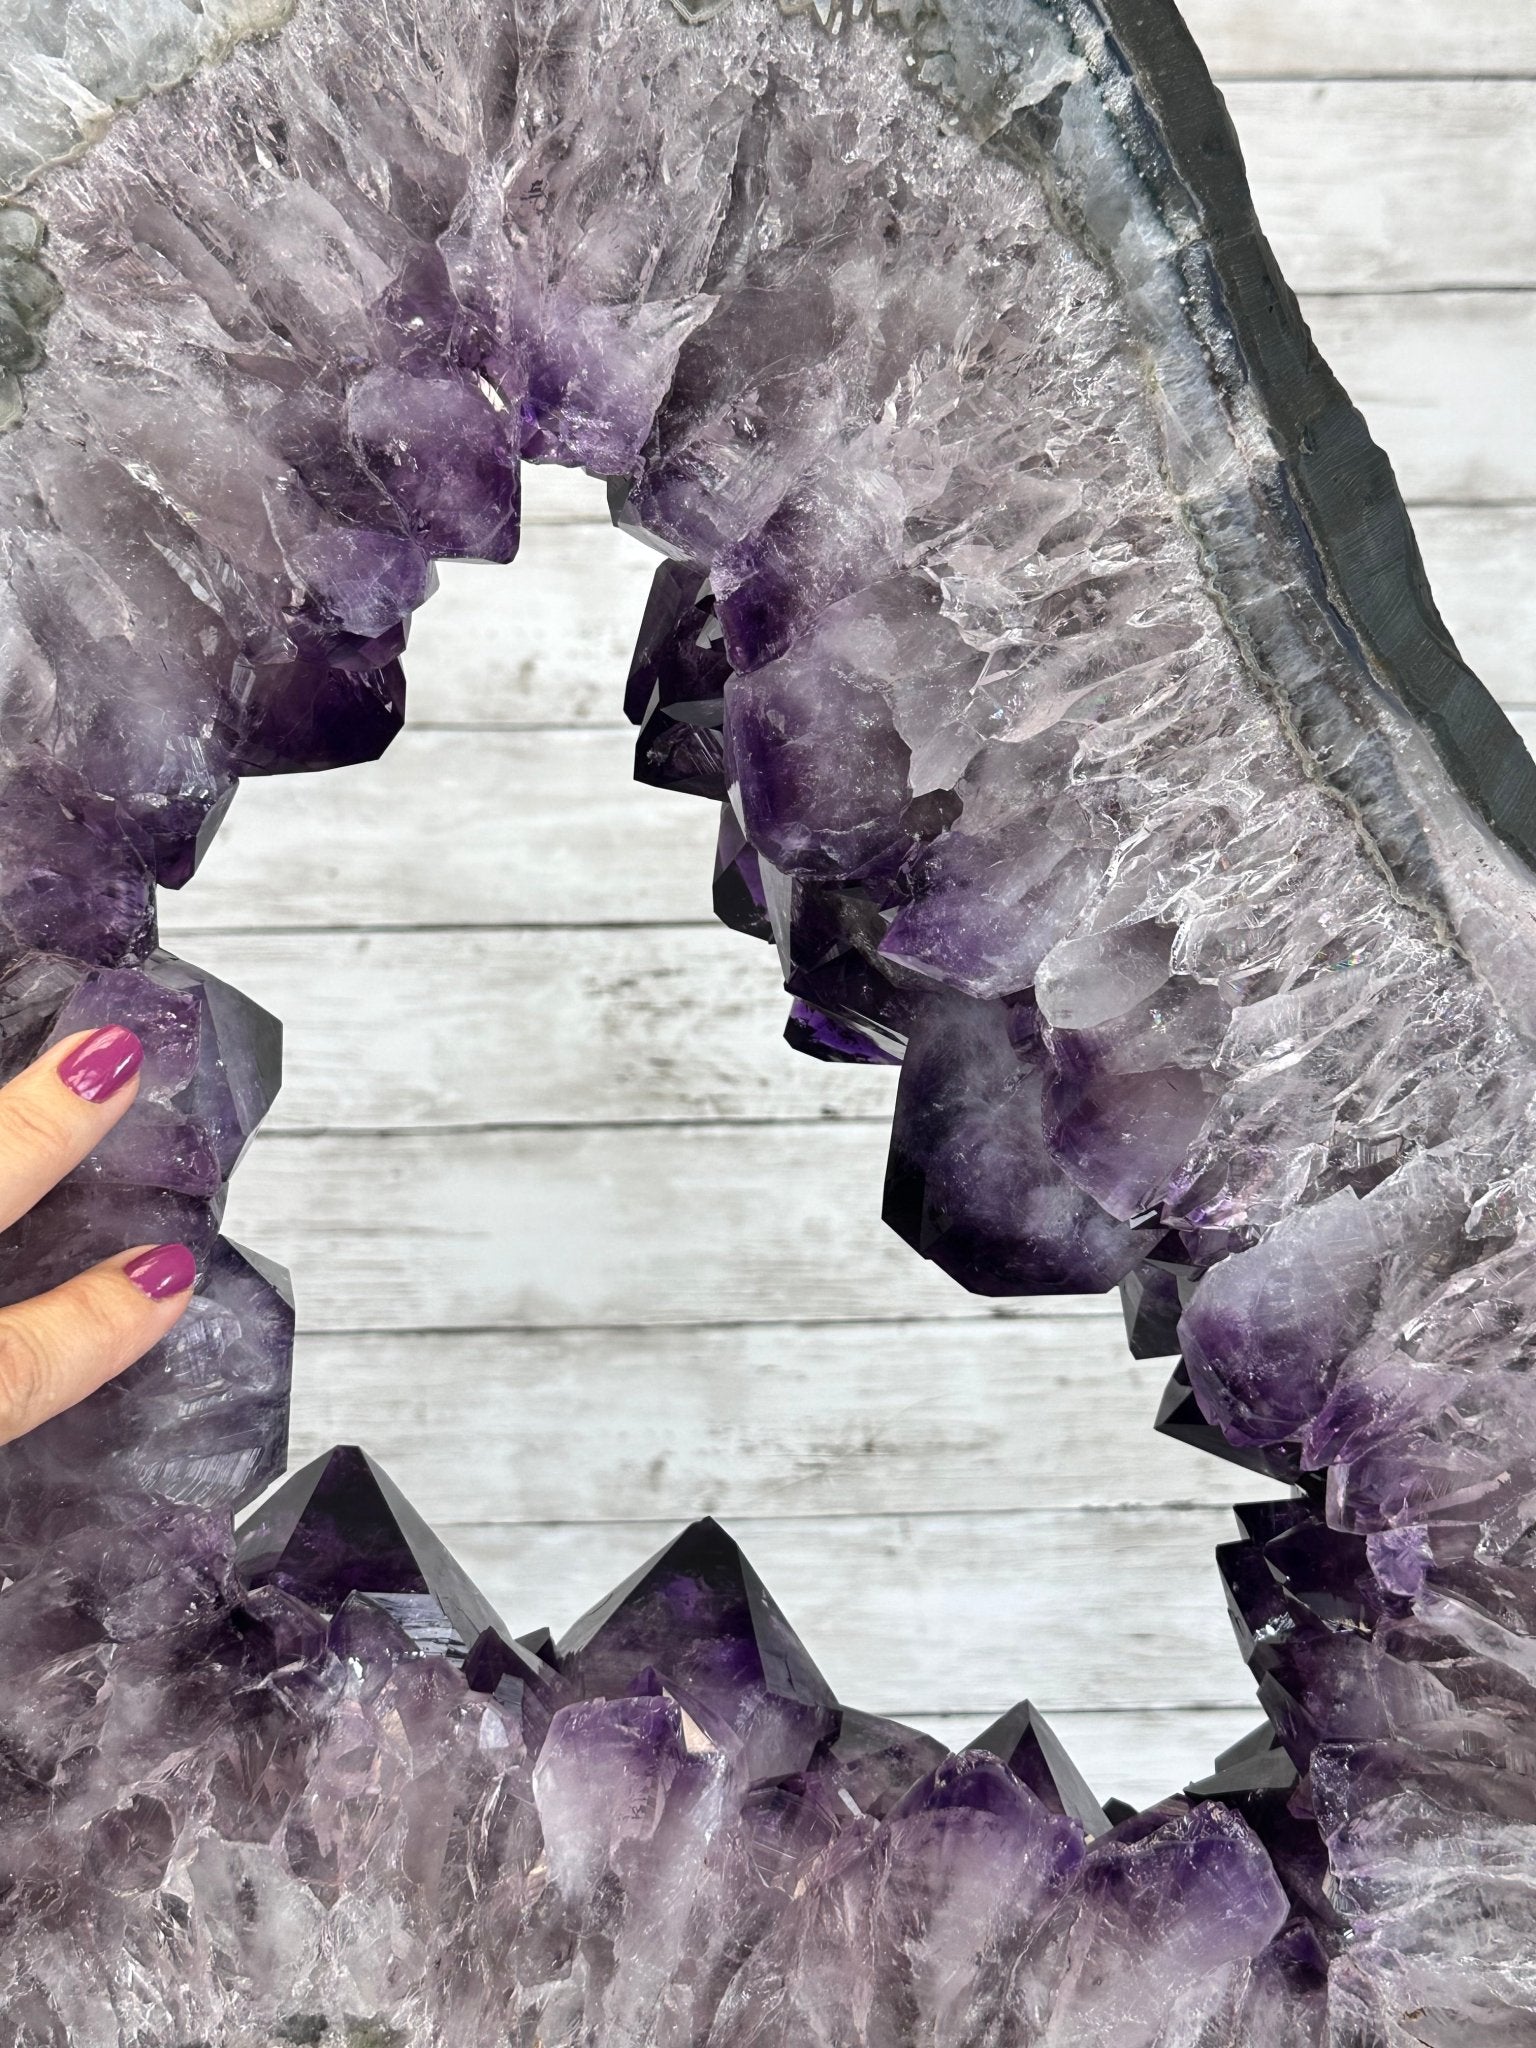 Super Quality Amethyst Portal, Rotating Stand, 171 lbs & 73" Tall #5604-0133 - Brazil GemsBrazil GemsSuper Quality Amethyst Portal, Rotating Stand, 171 lbs & 73" Tall #5604-0133Portals on Rotating Bases5604-0133